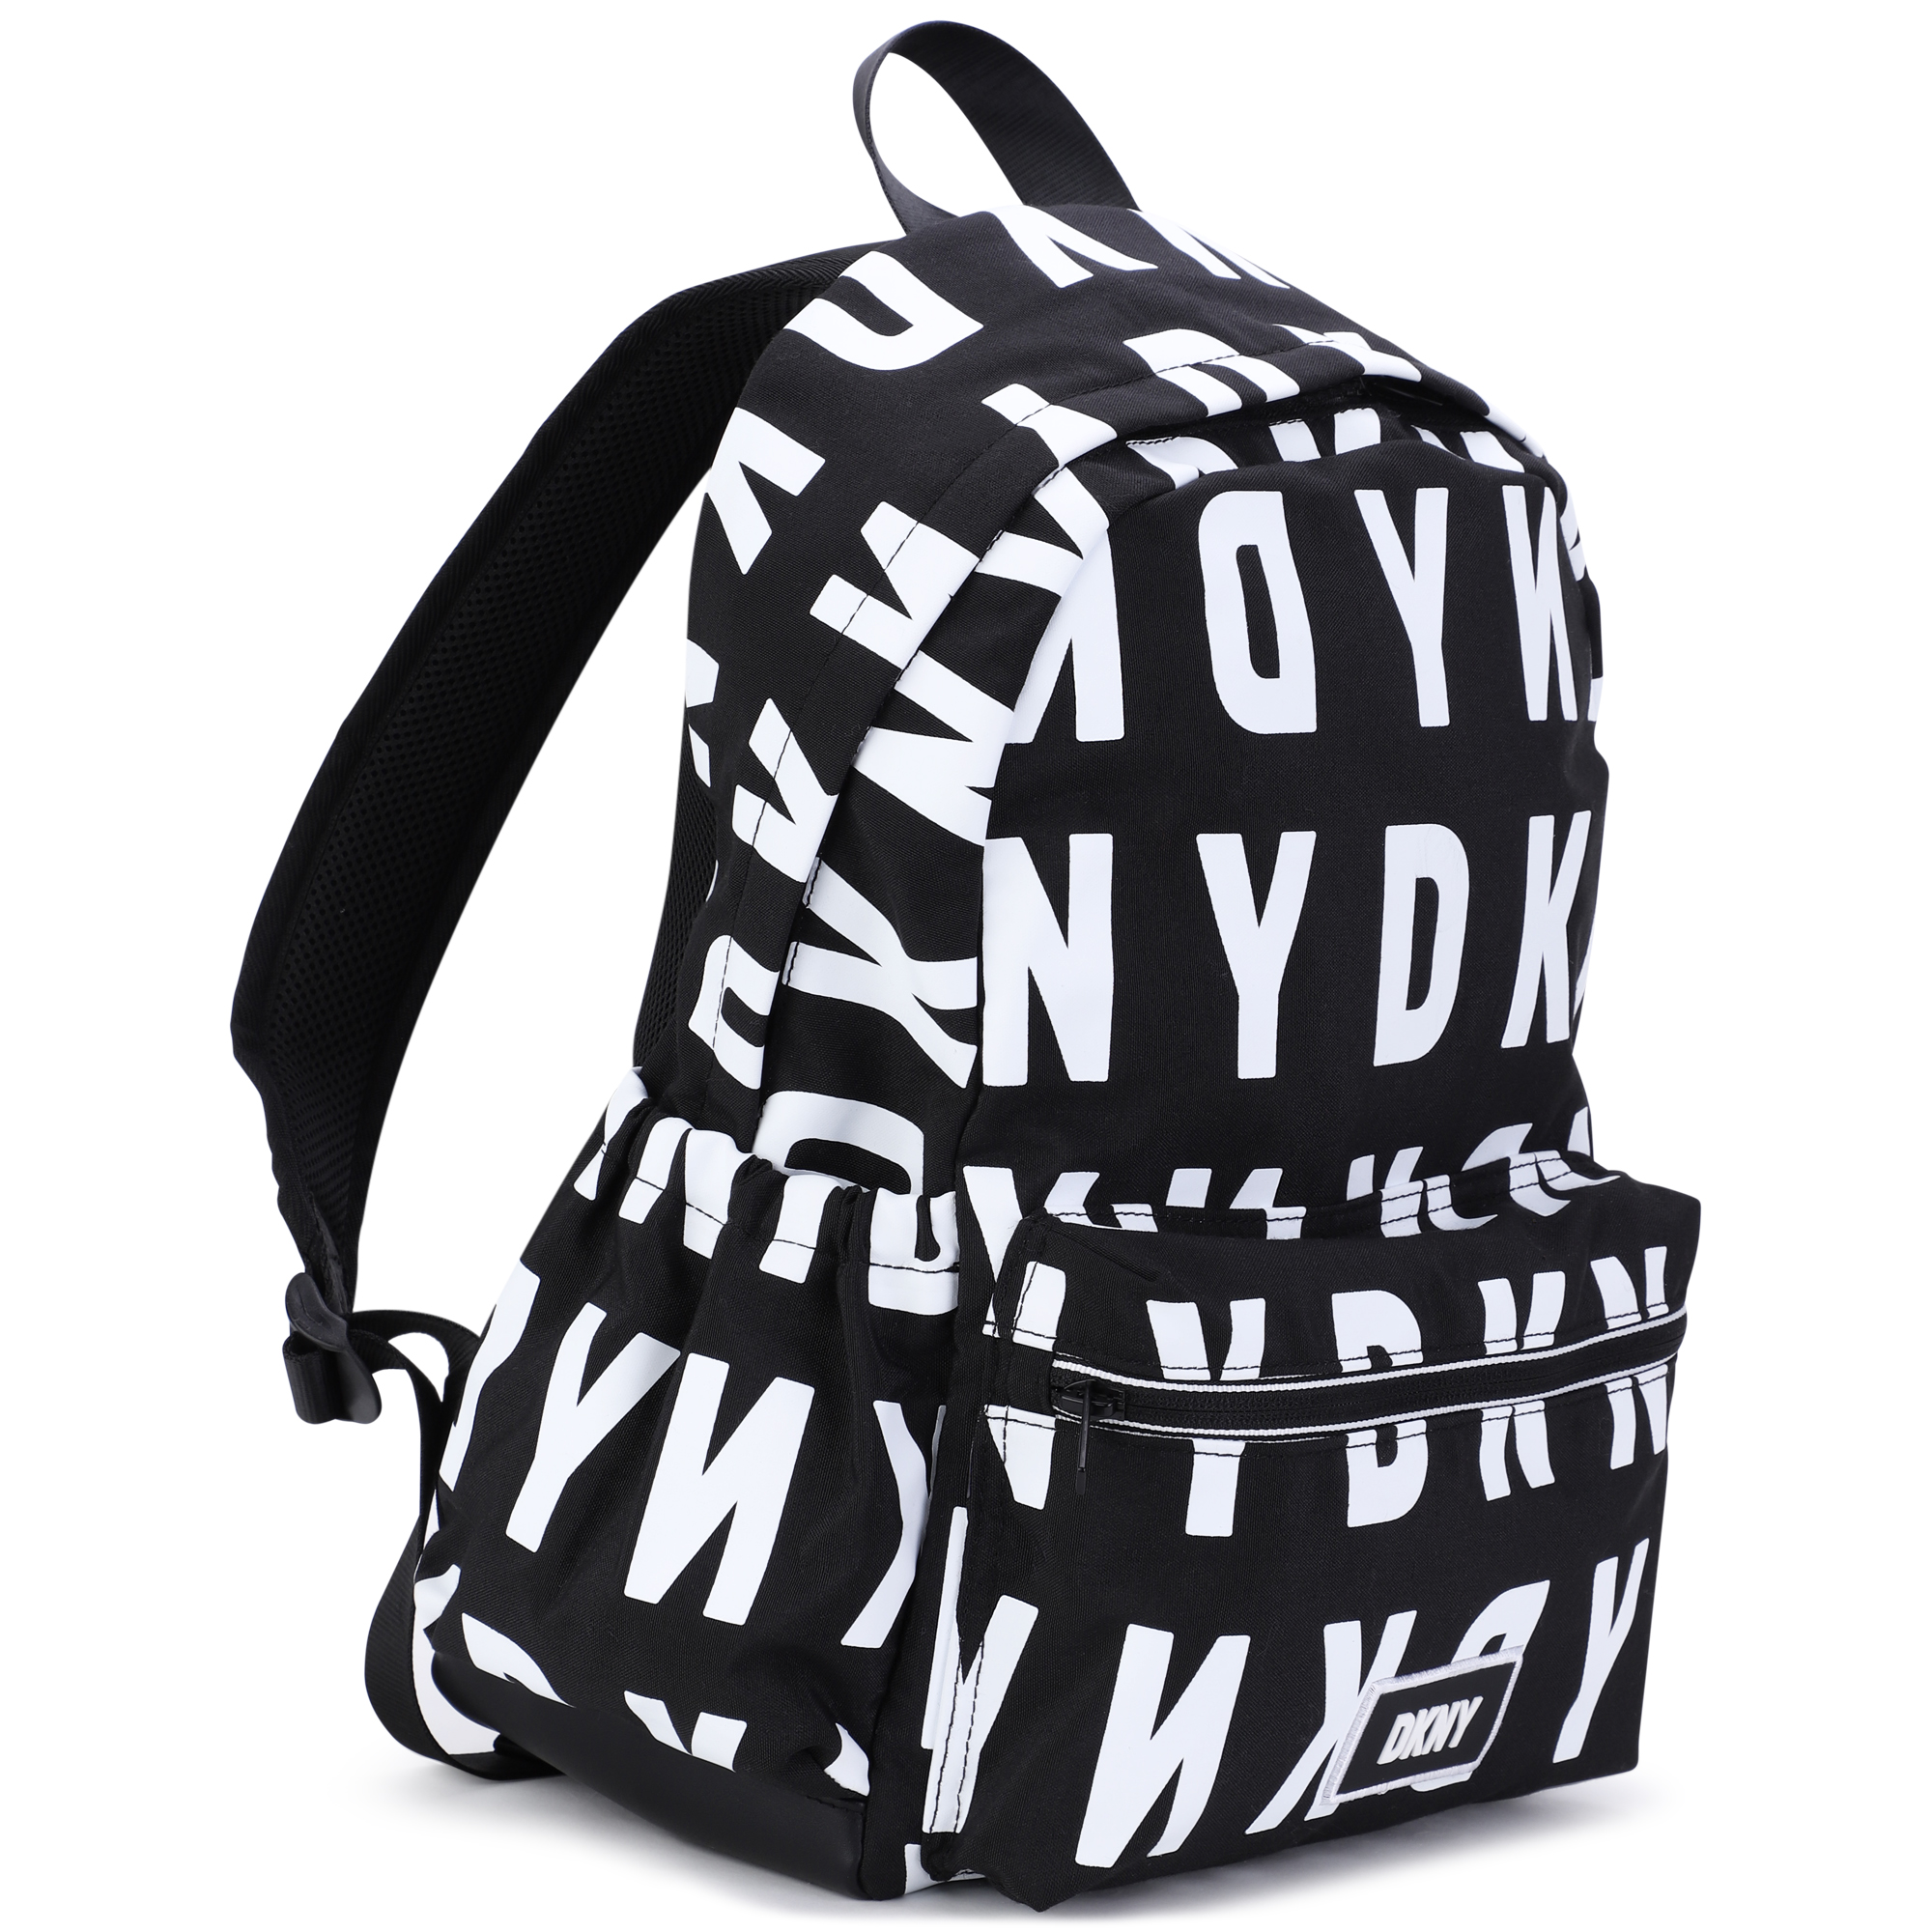 Printed Backpack DKNY for BOY